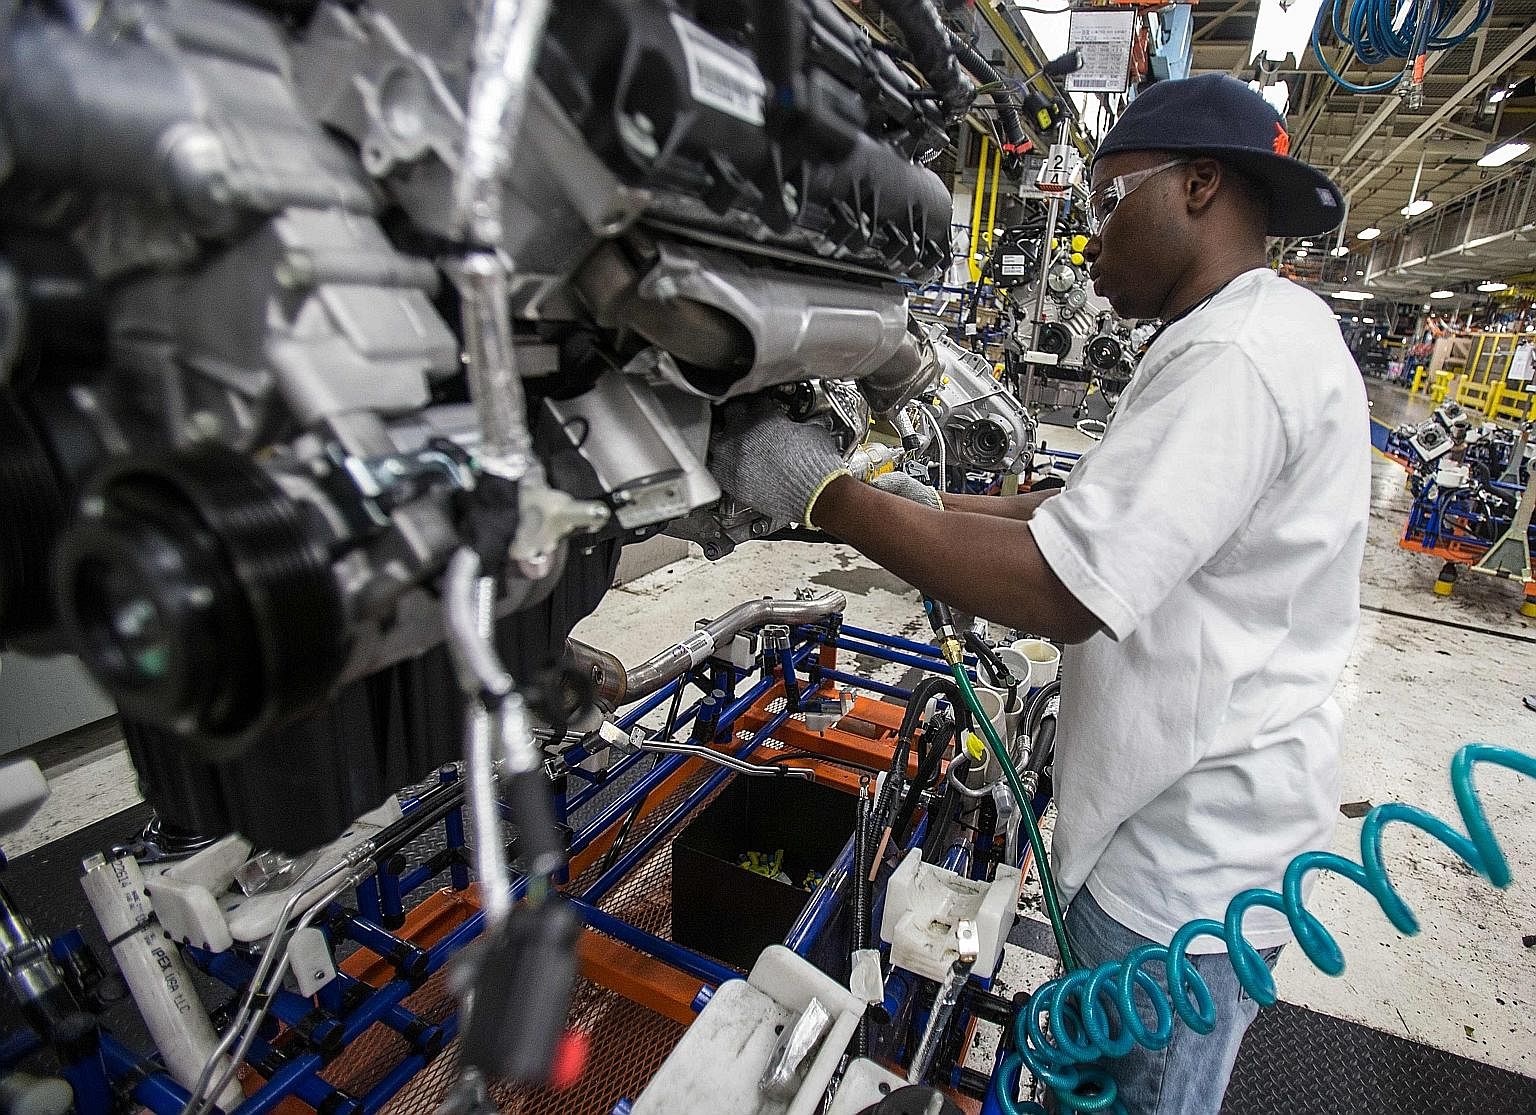 The assembly line for Chrysler cars at the Jefferson North Assembly Plant in Detroit, Michigan. The narrative that "good jobs" in US manufacturing have been "lost" to competition from imports does not fit the facts, as imports create jobs too, says t